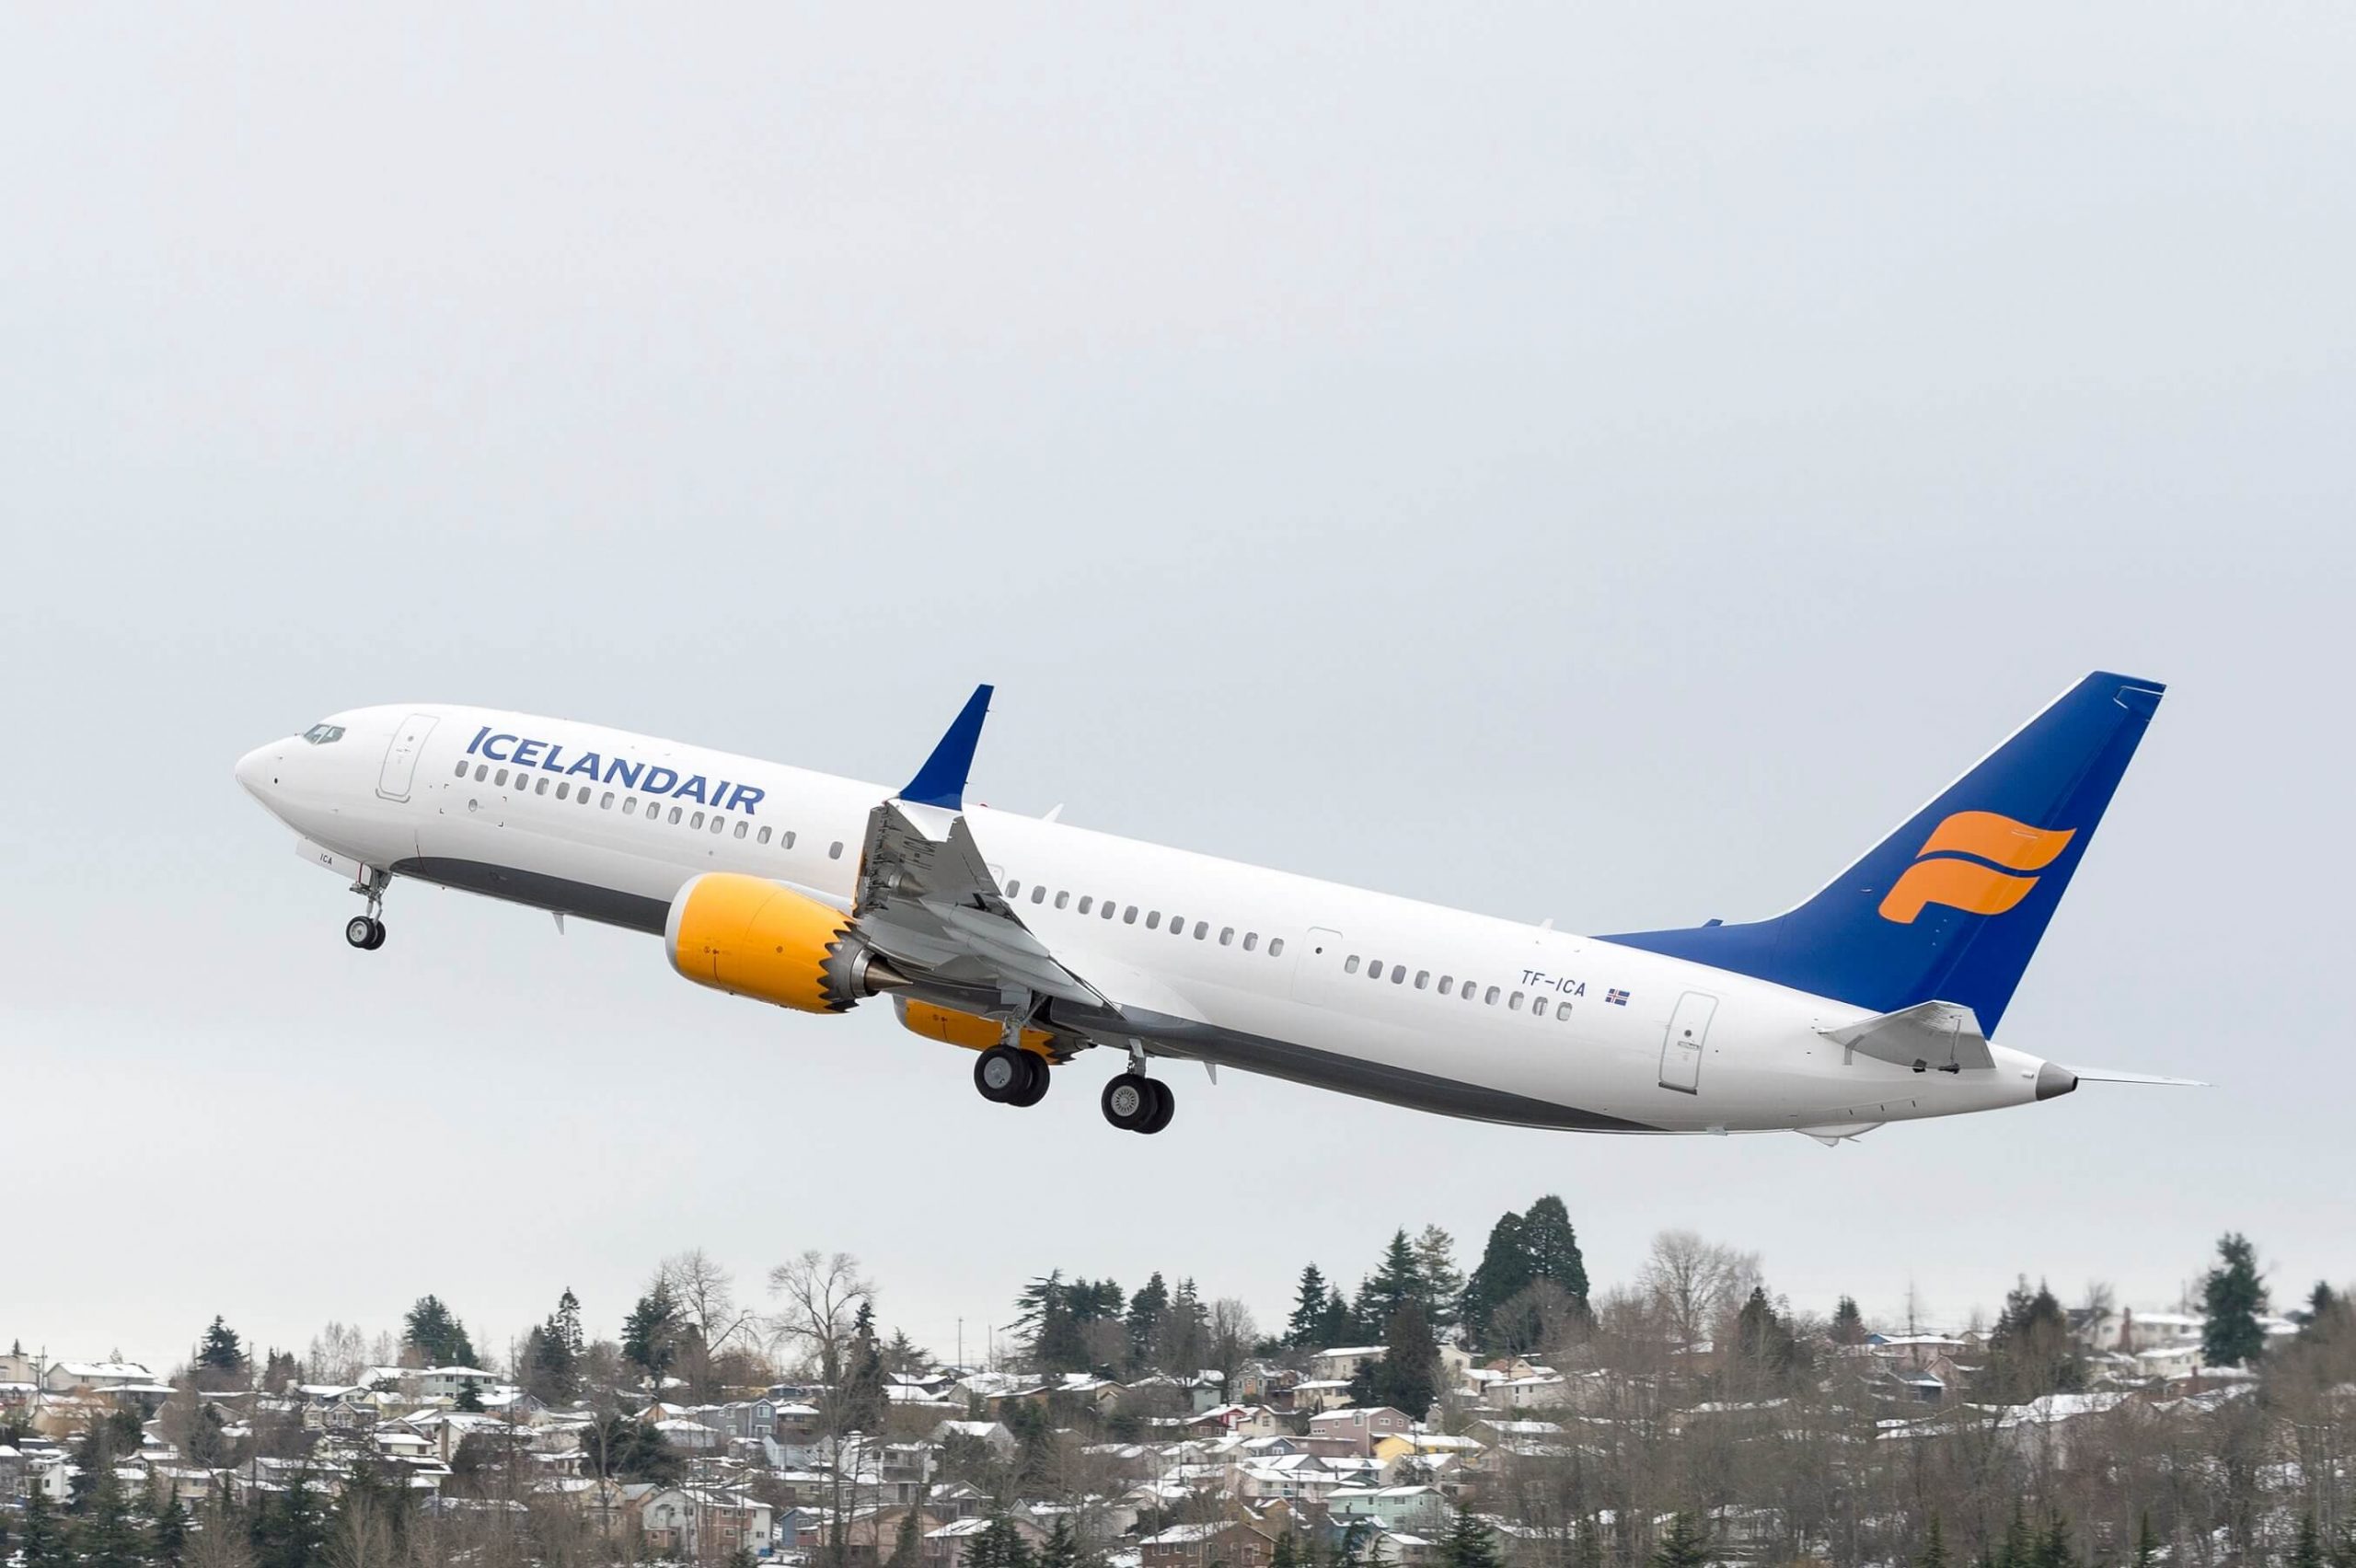 Icelandair enters short-term ACMI agreement with Fly2Sky for one A321